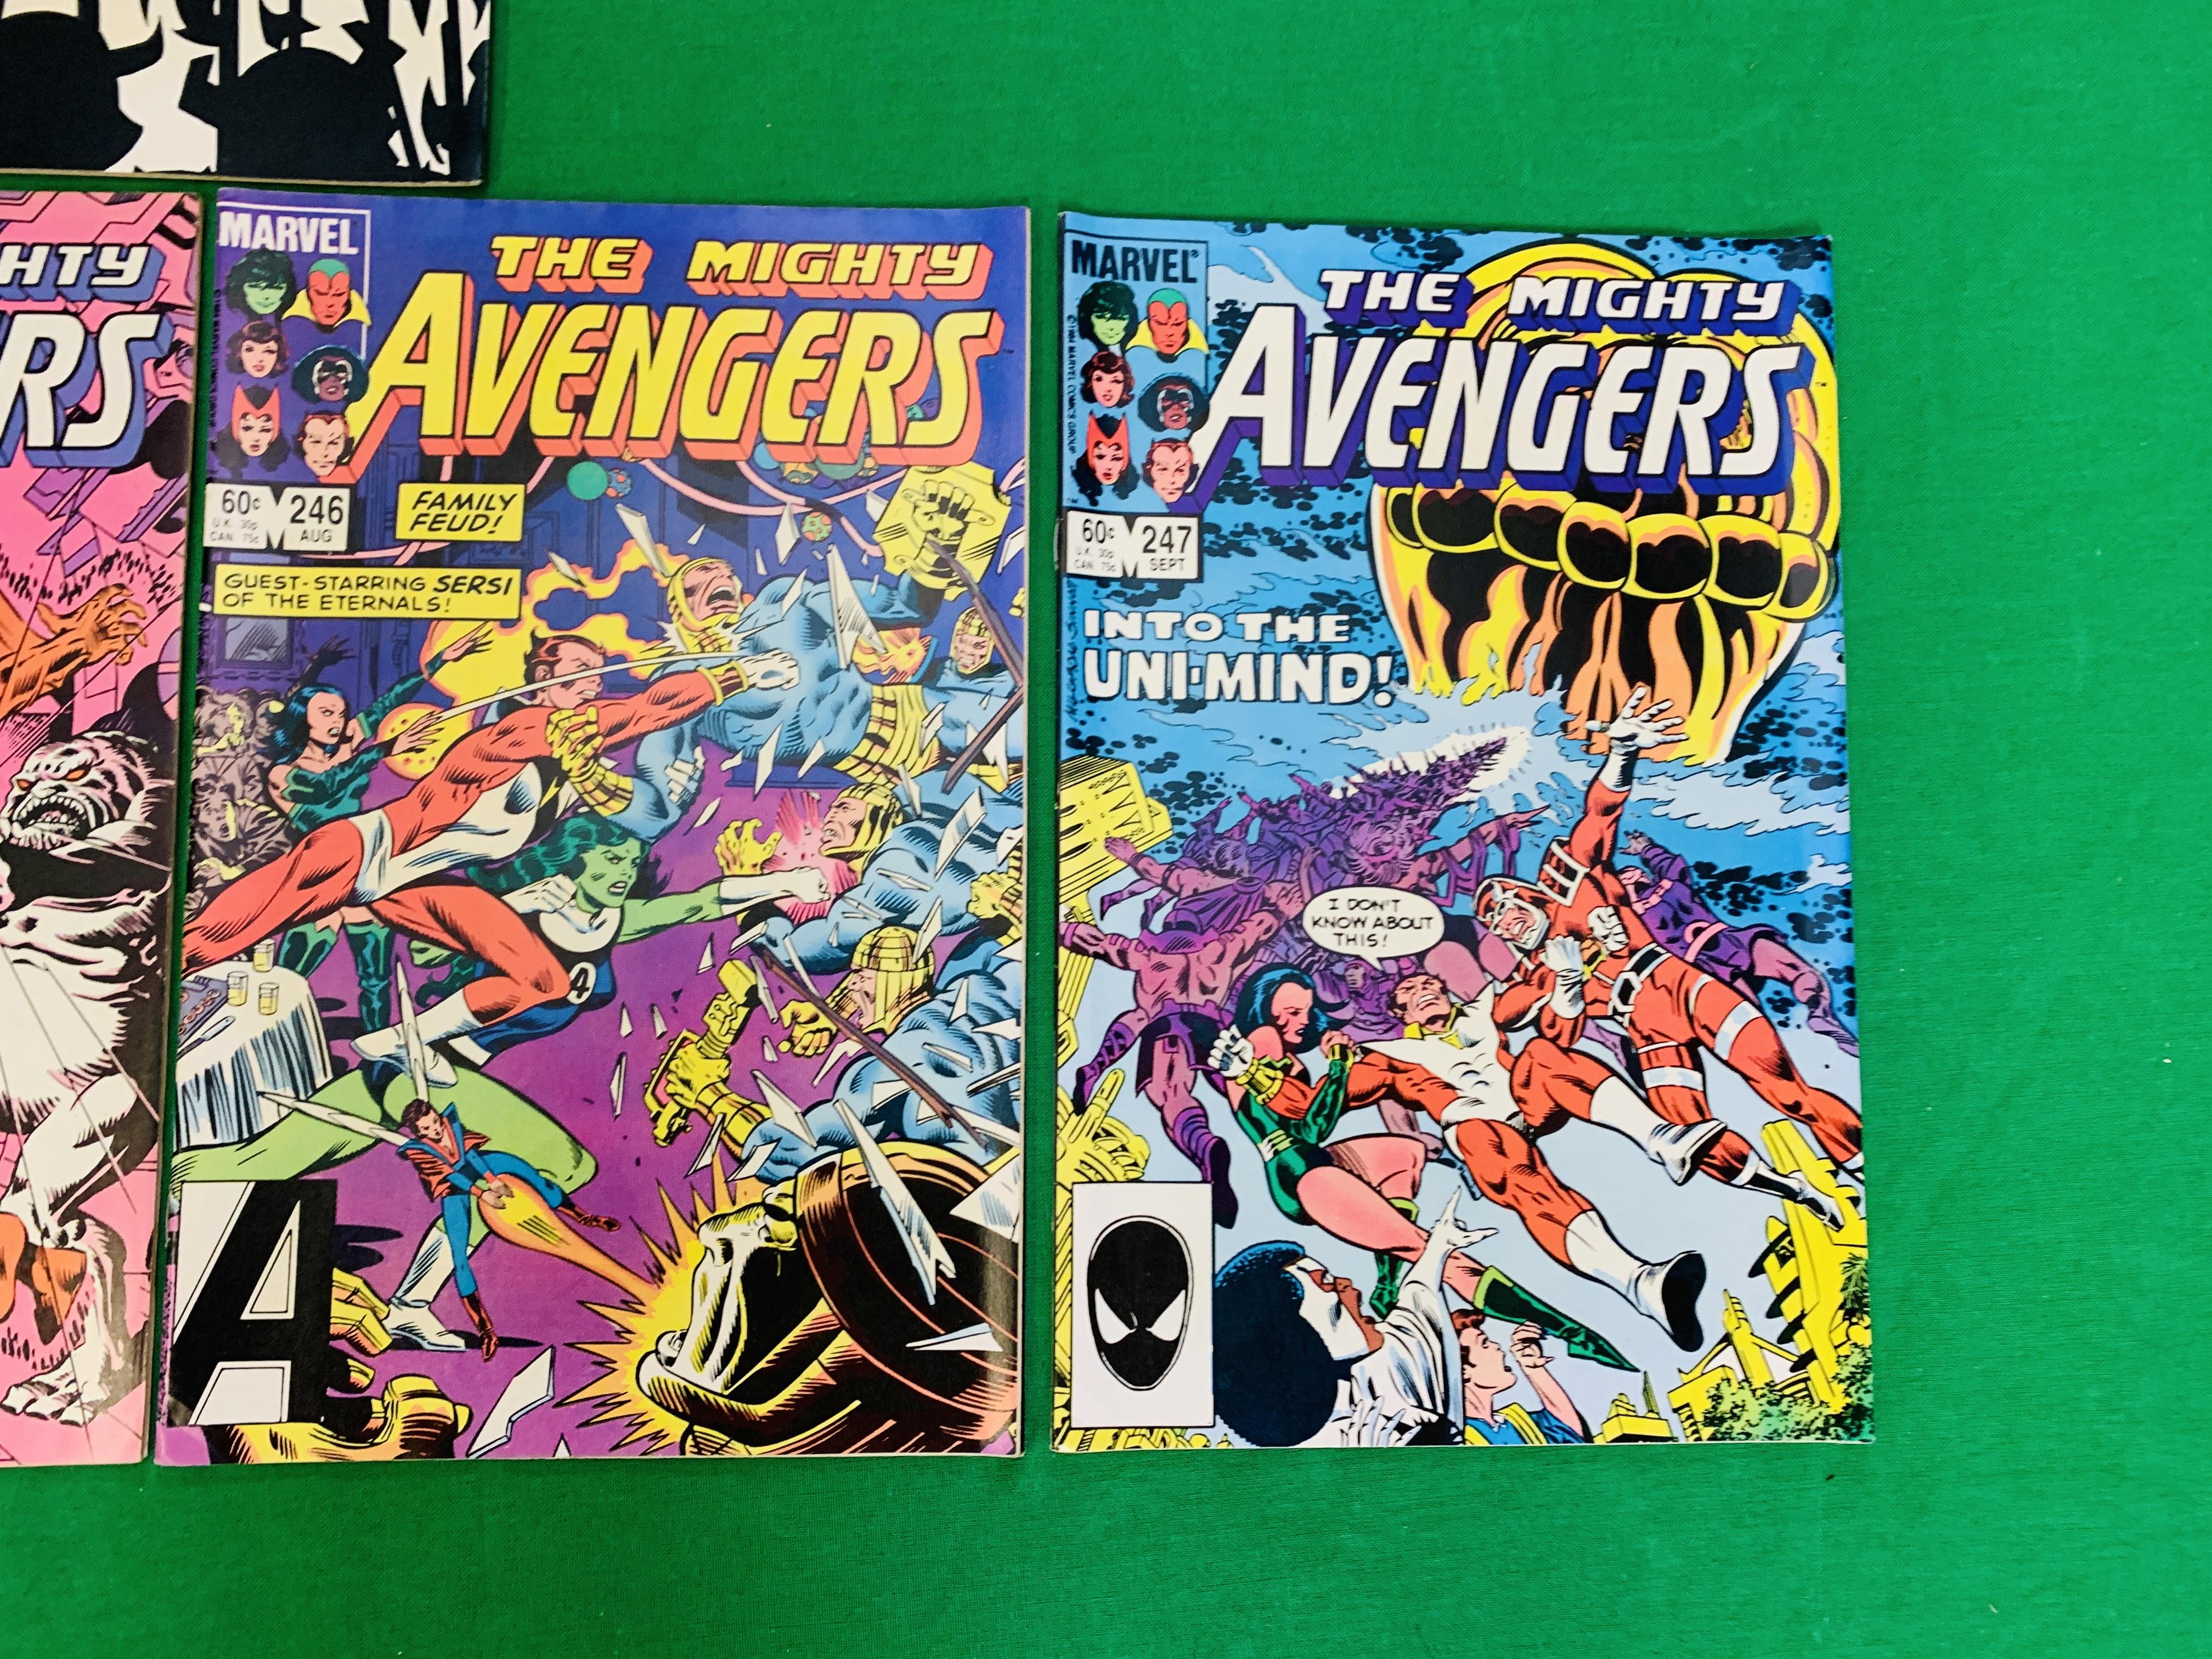 MARVEL COMICS THE AVENGERS NO. 101 - 299, MISSING ISSUES 103 AND 110. - Image 102 of 130